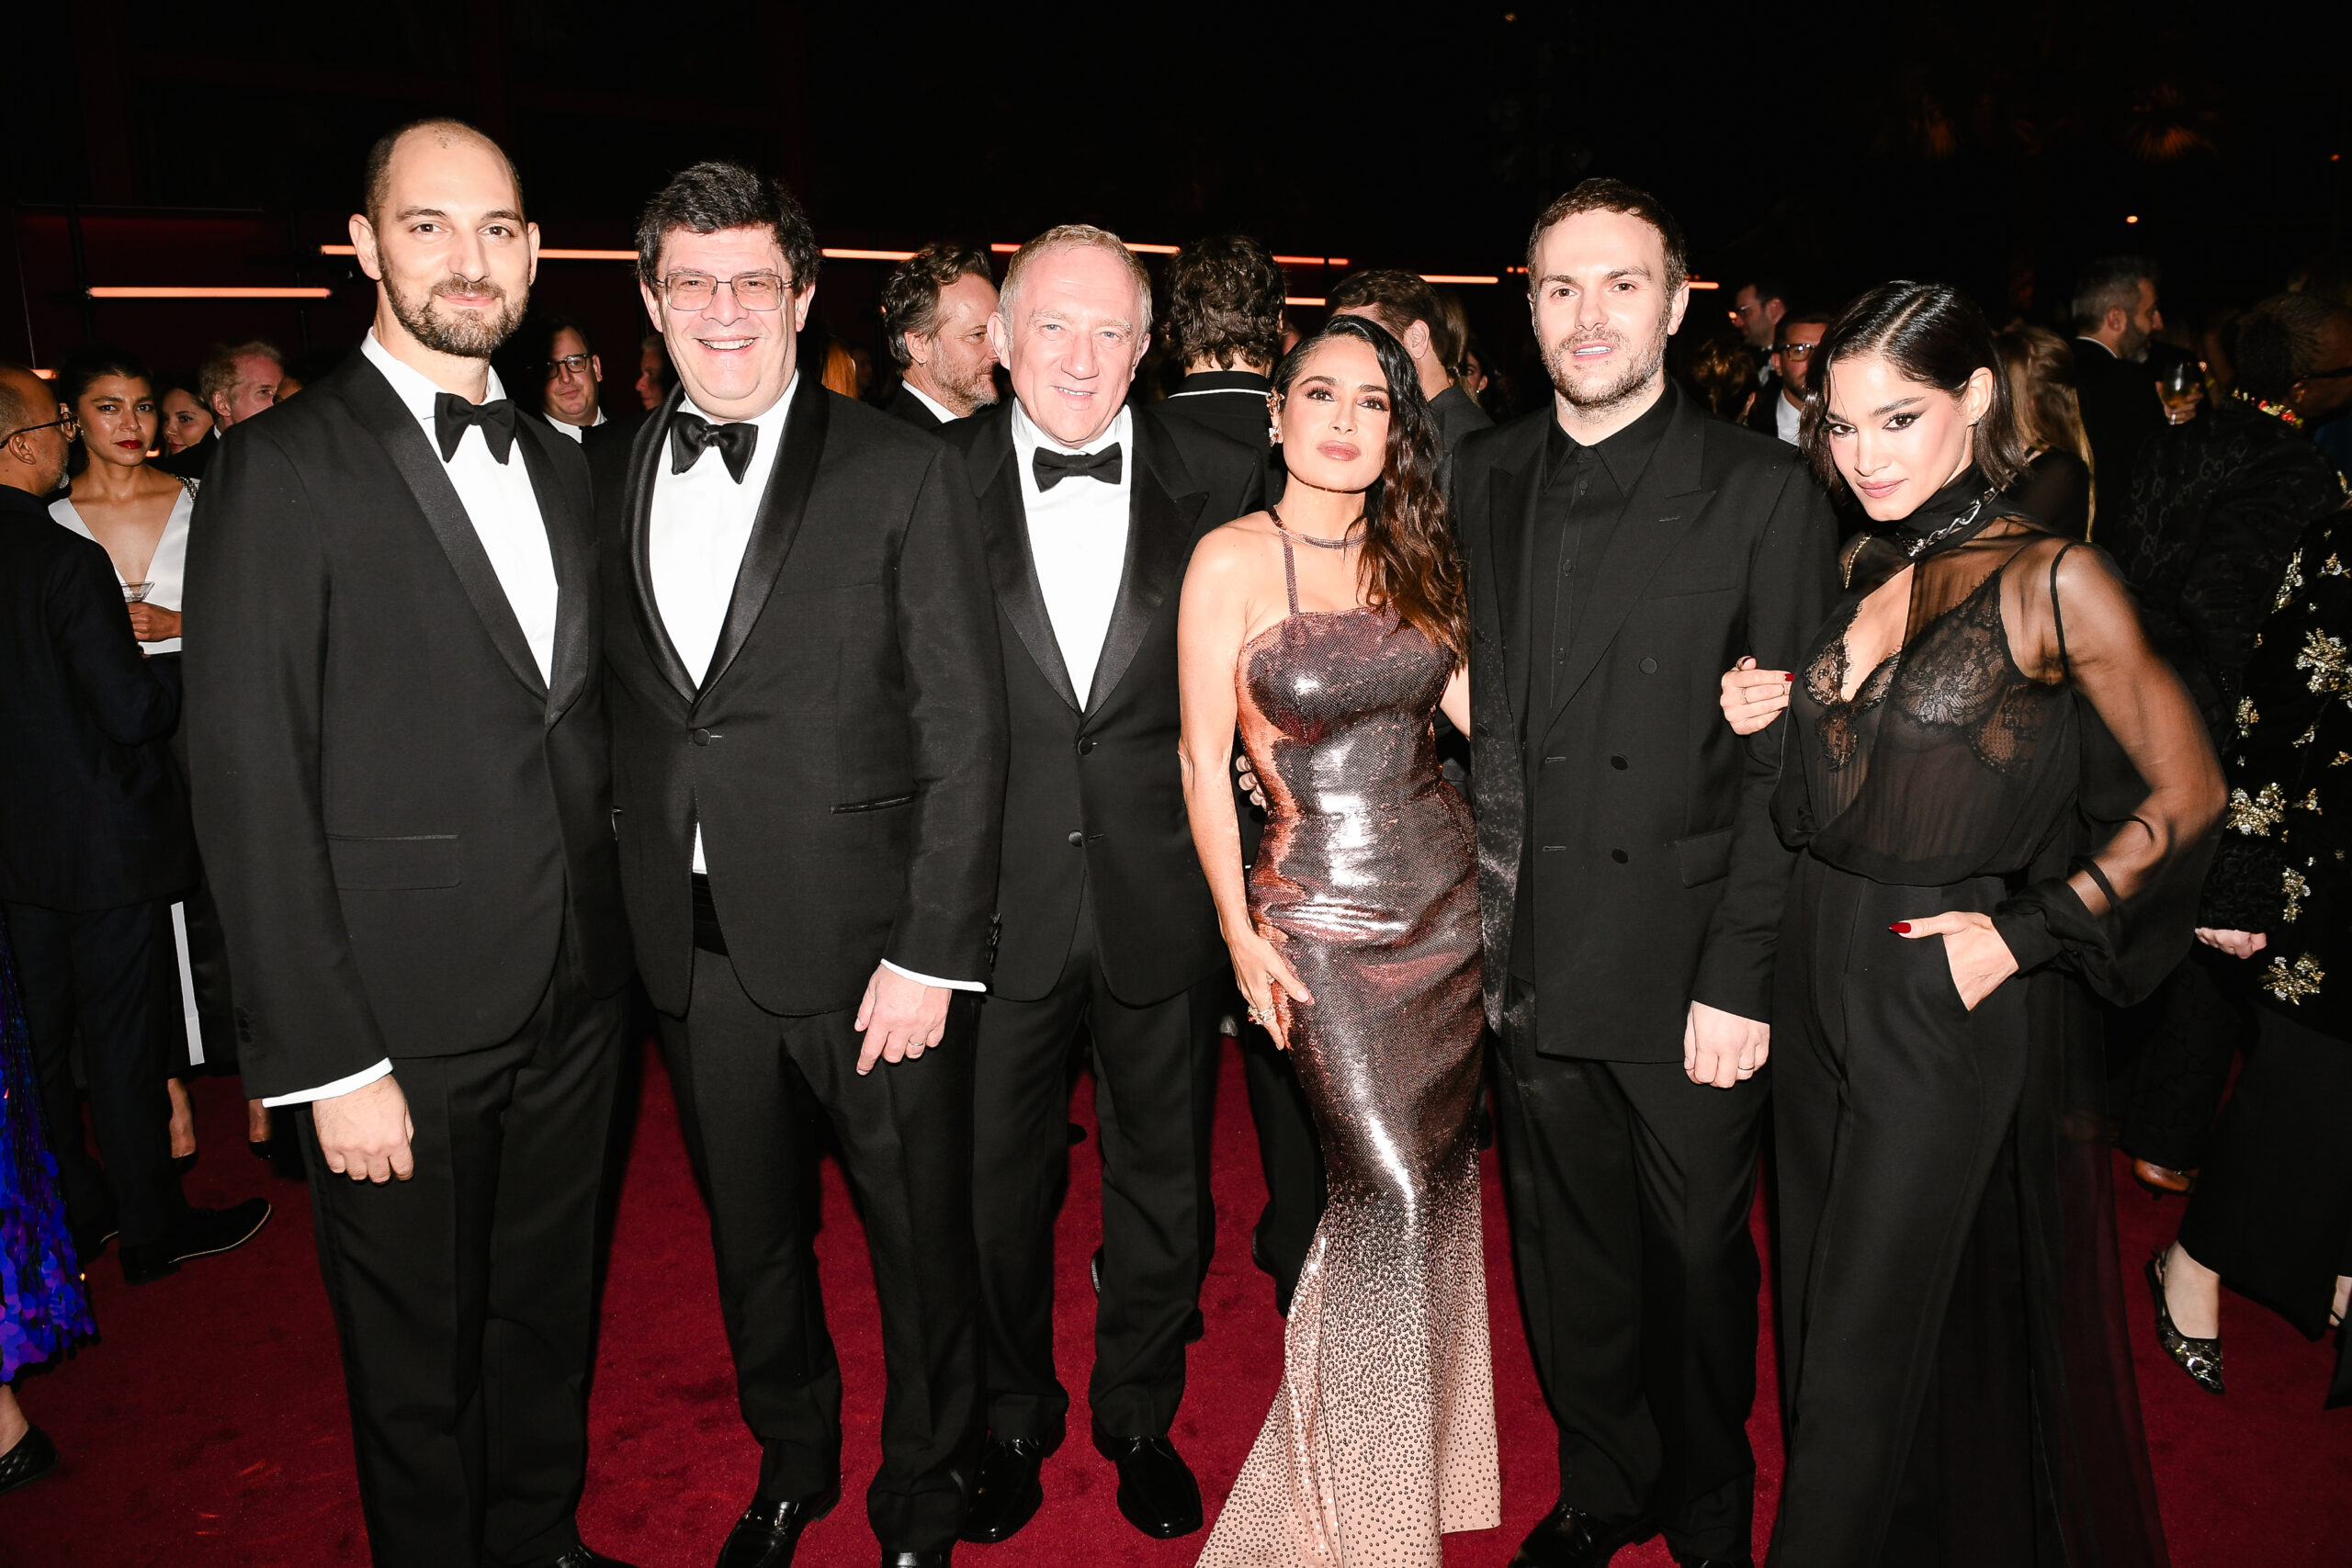 Among the luminaries were Daniele Calisti, Jean-Francois Palus, François-Henri Pinault, Salma Hayek, Sabato de Sarno, and Sofia Boutella, each adding a unique allure to the evening's tapestry of fashion. (Photo by Stefanie Keenan/Getty Images for LACMA)
